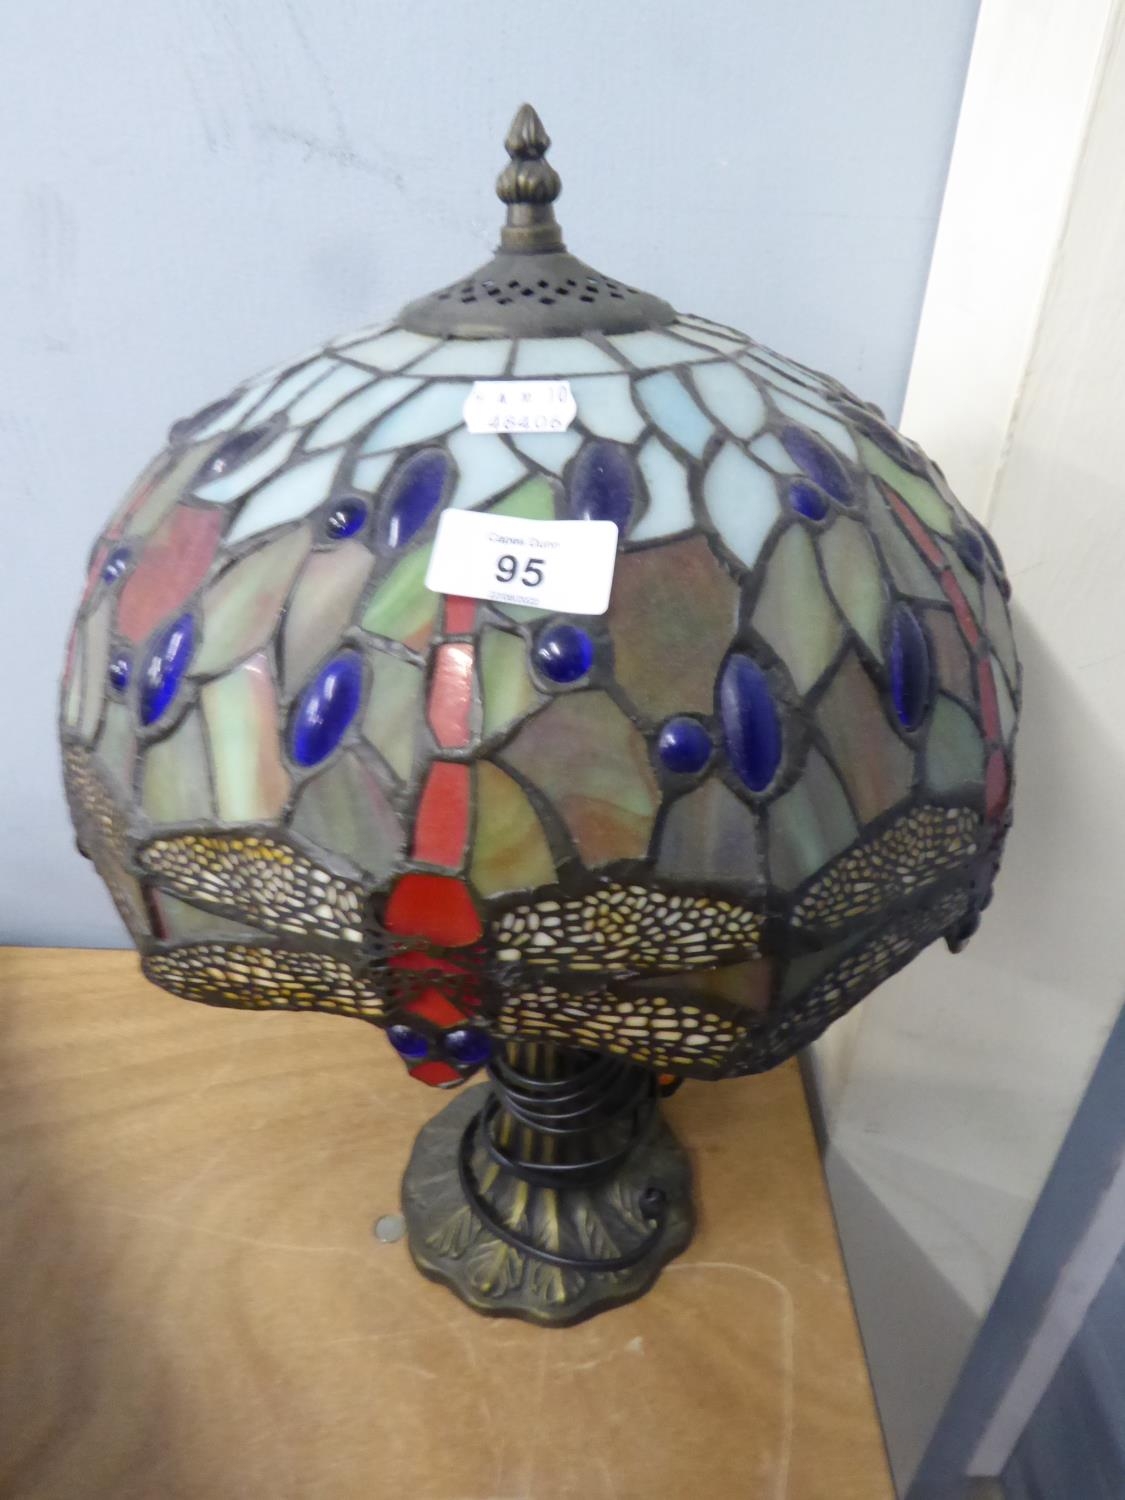 TIFFANY STYLE CAST METAL ELECTRIC TABLE LAMP WITH LEADED AND STAINED GLASS ‘DRAGONFLY’ PATTERN DOMED